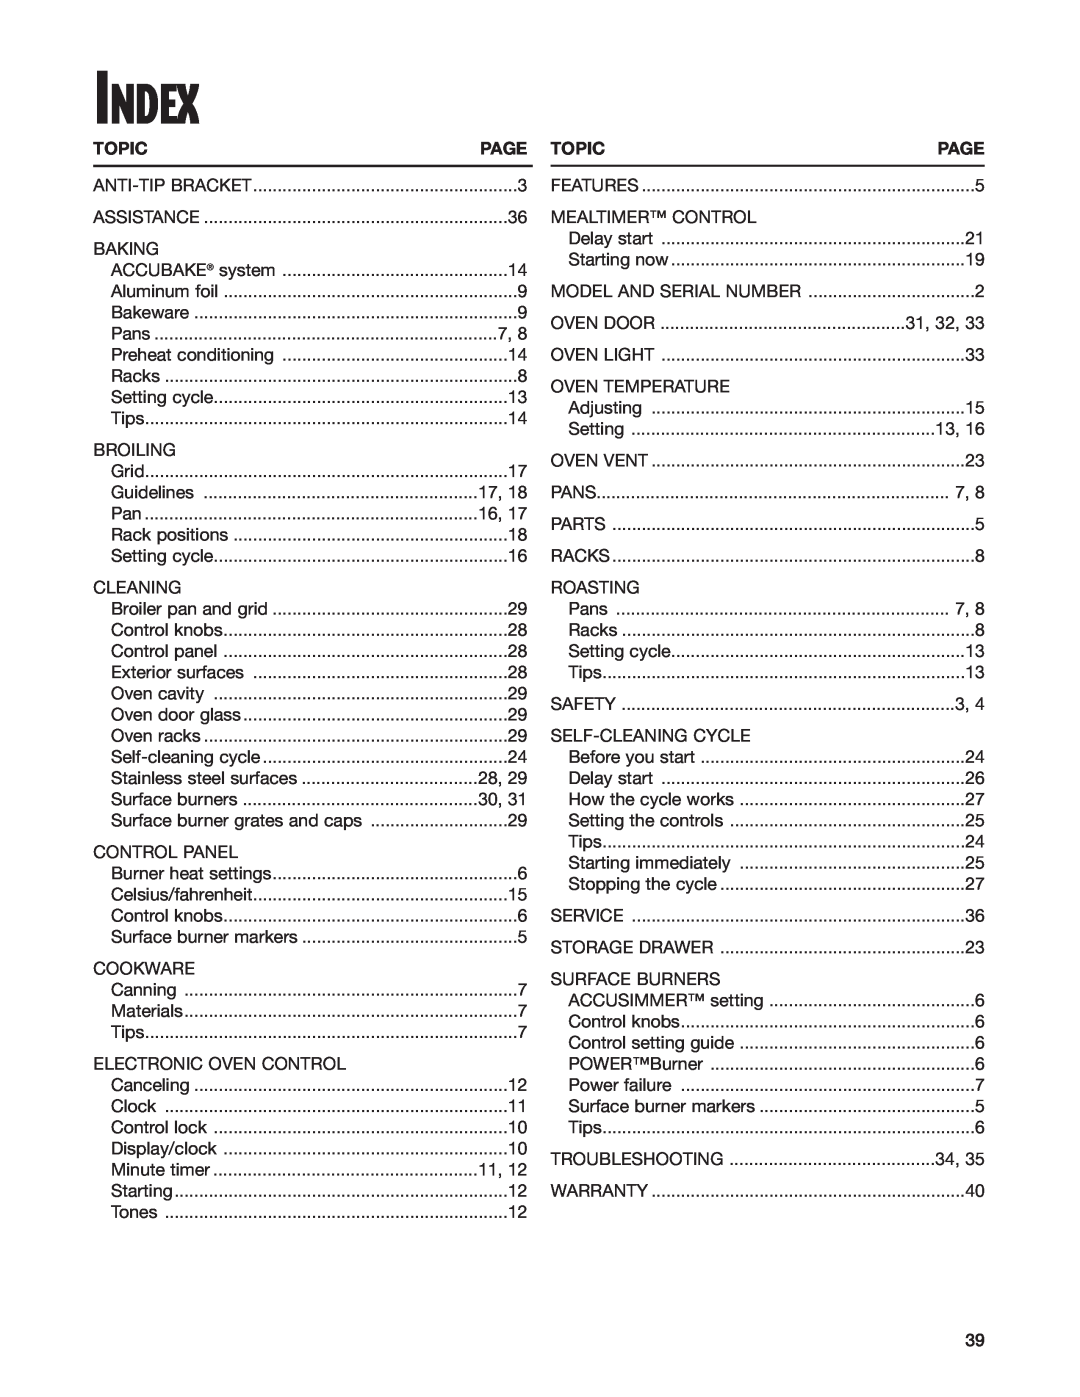 Whirlpool GS395LEH warranty Index, Topic, Page 